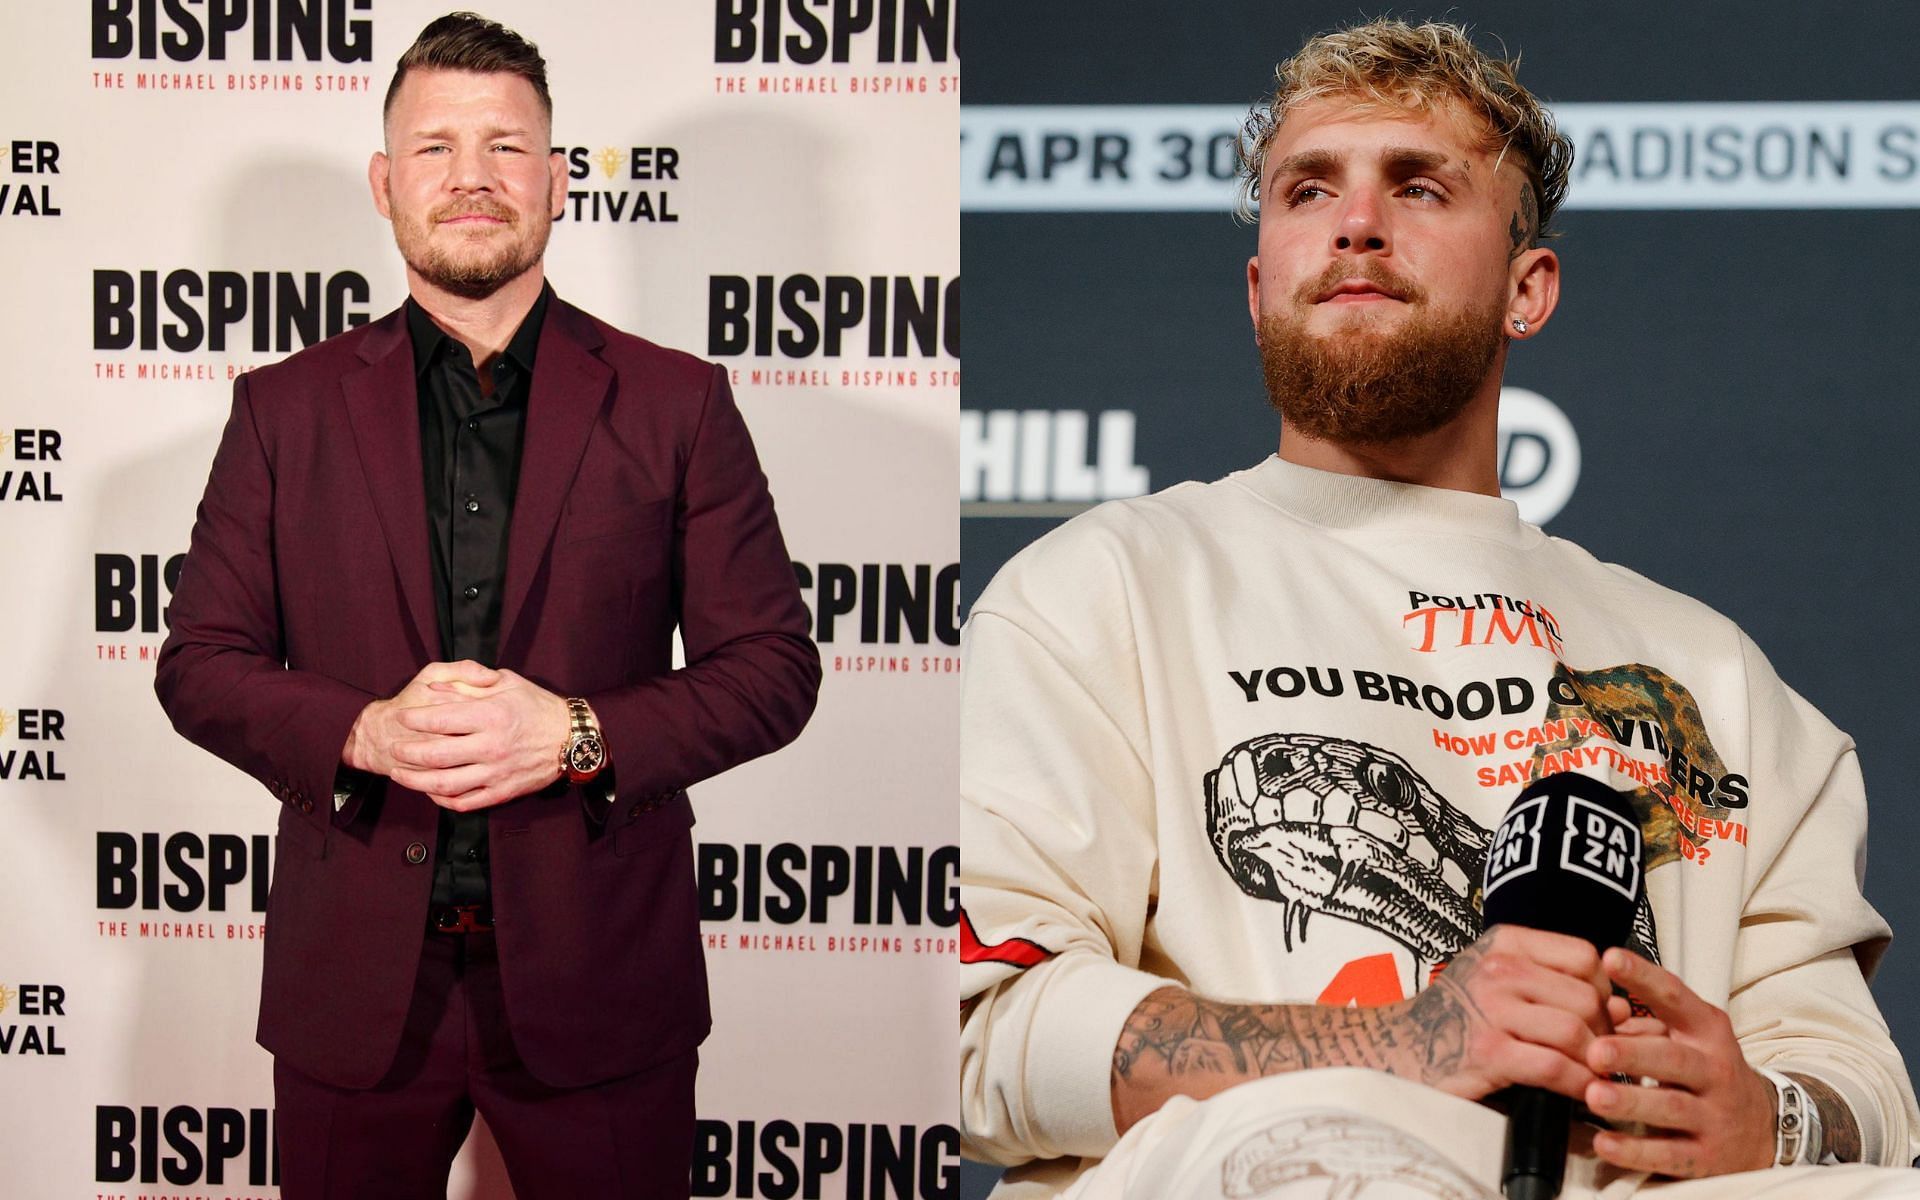 Bisping and Paul (left and right, images courtesy of @mikebisping Instagram and Getty)